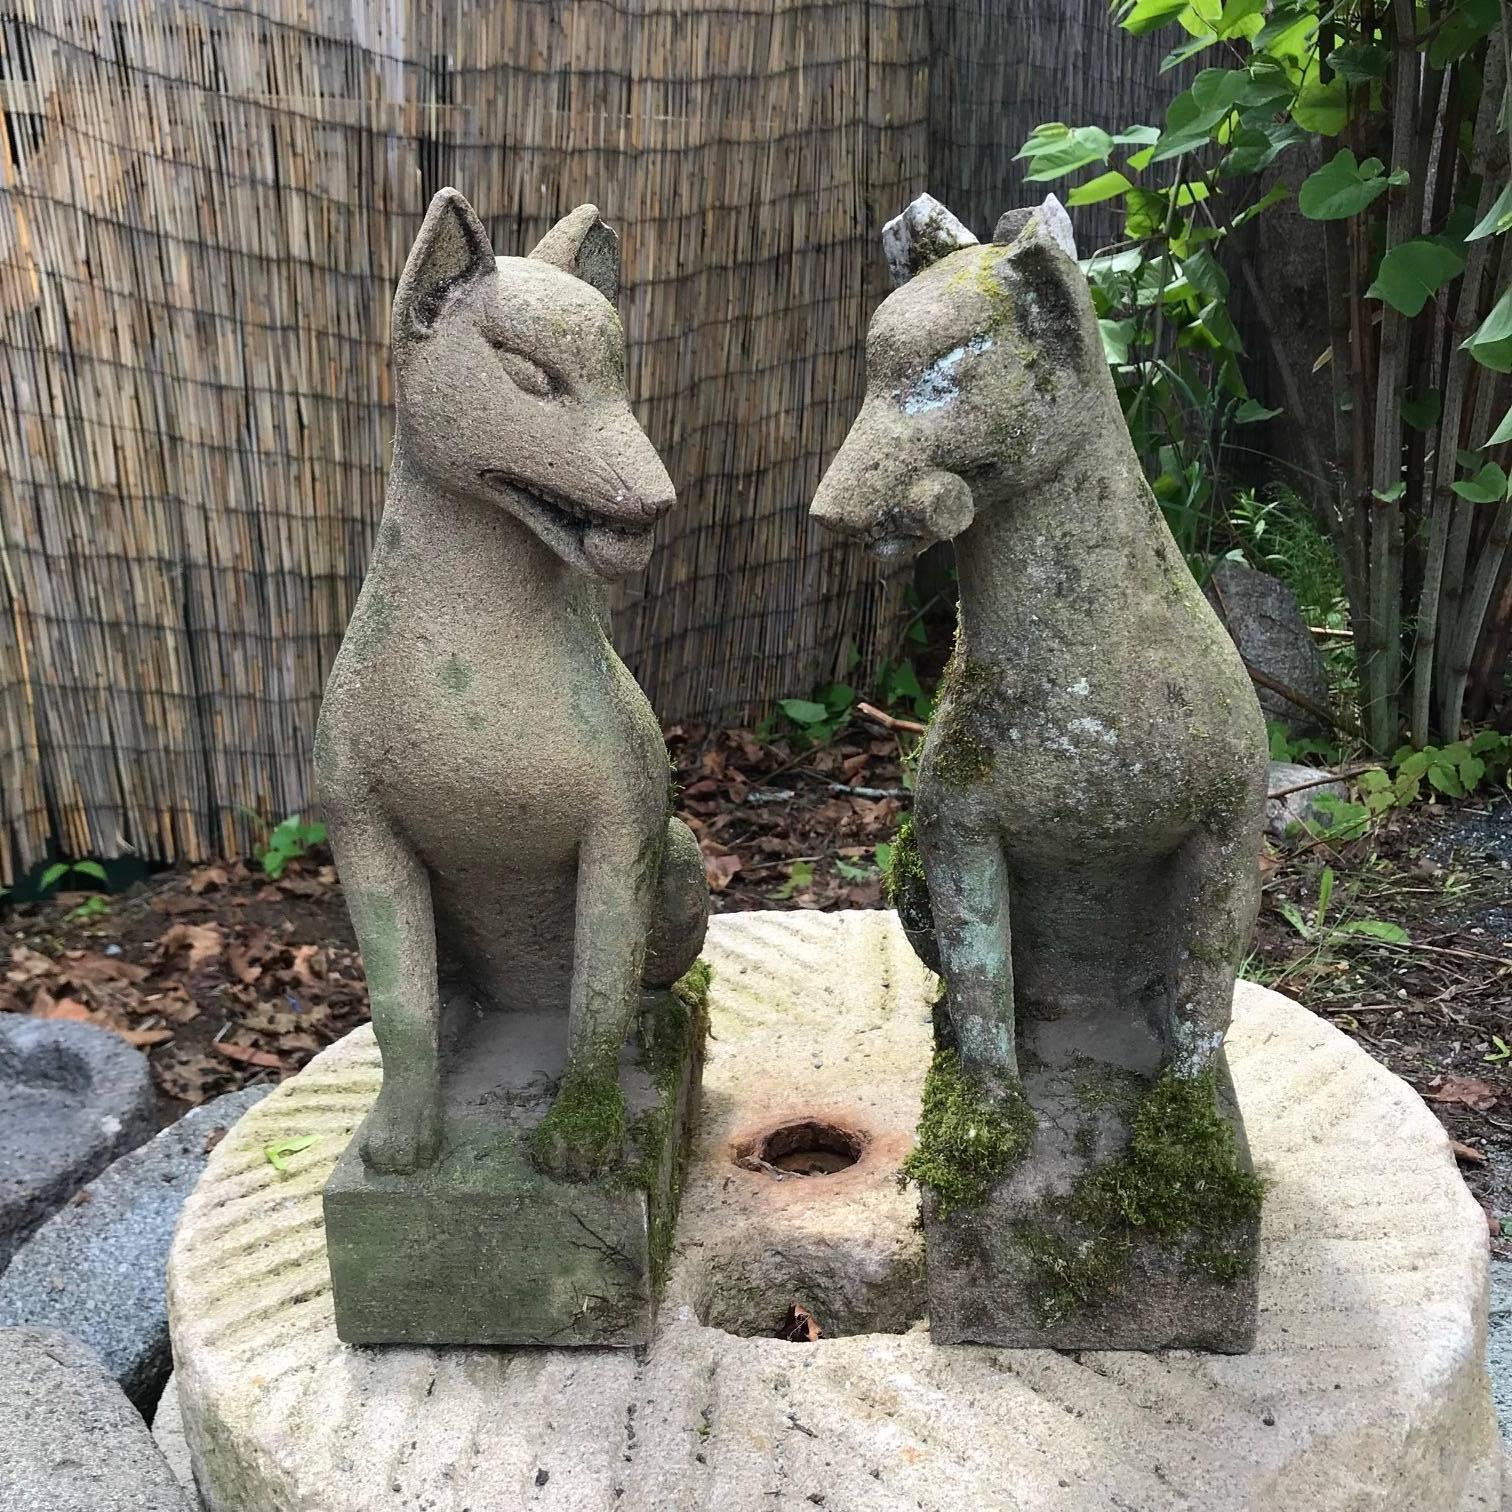 From our recent Japanese acquisitions travels.

Antiques rarely found in granite stone.

Japan, a fine tall and rare pair of hand carved granite stone fox kitsune carved in a pleasing sinuous Art Deco manner, Taisho period.

Dimensions: 16